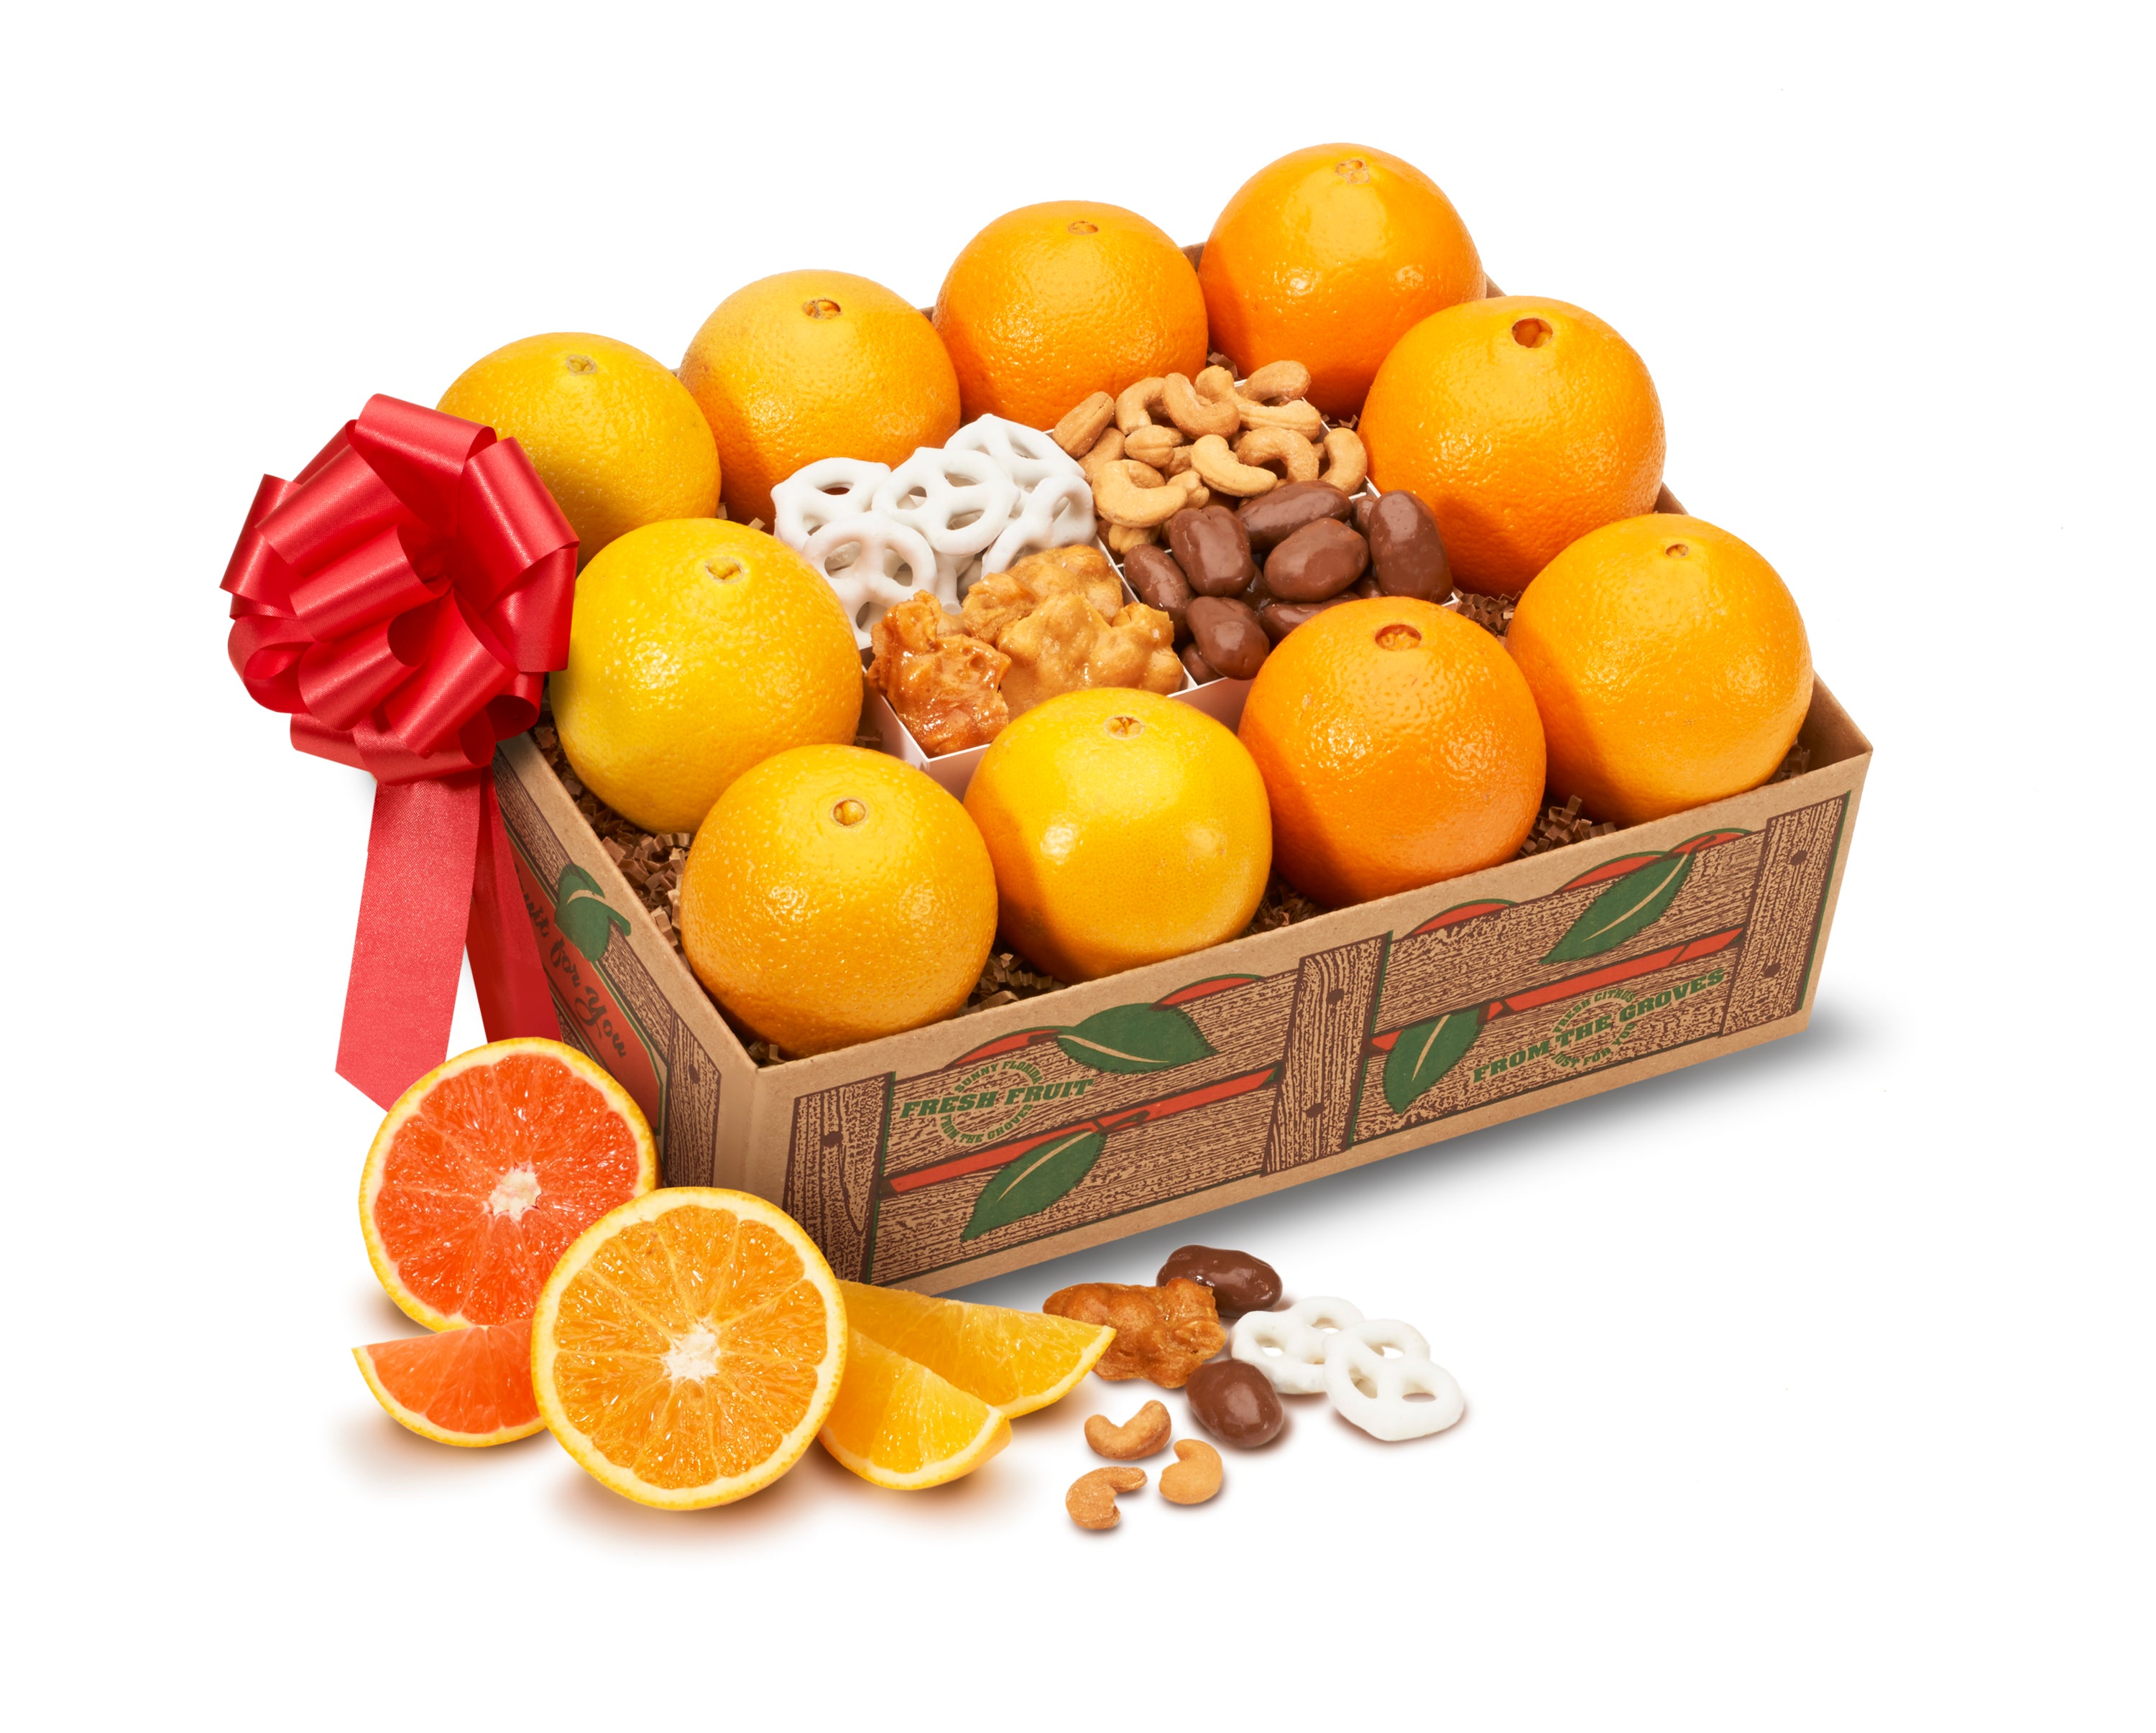 Grove fresh Navel Oranges, Scarlet Navels and Sweets!